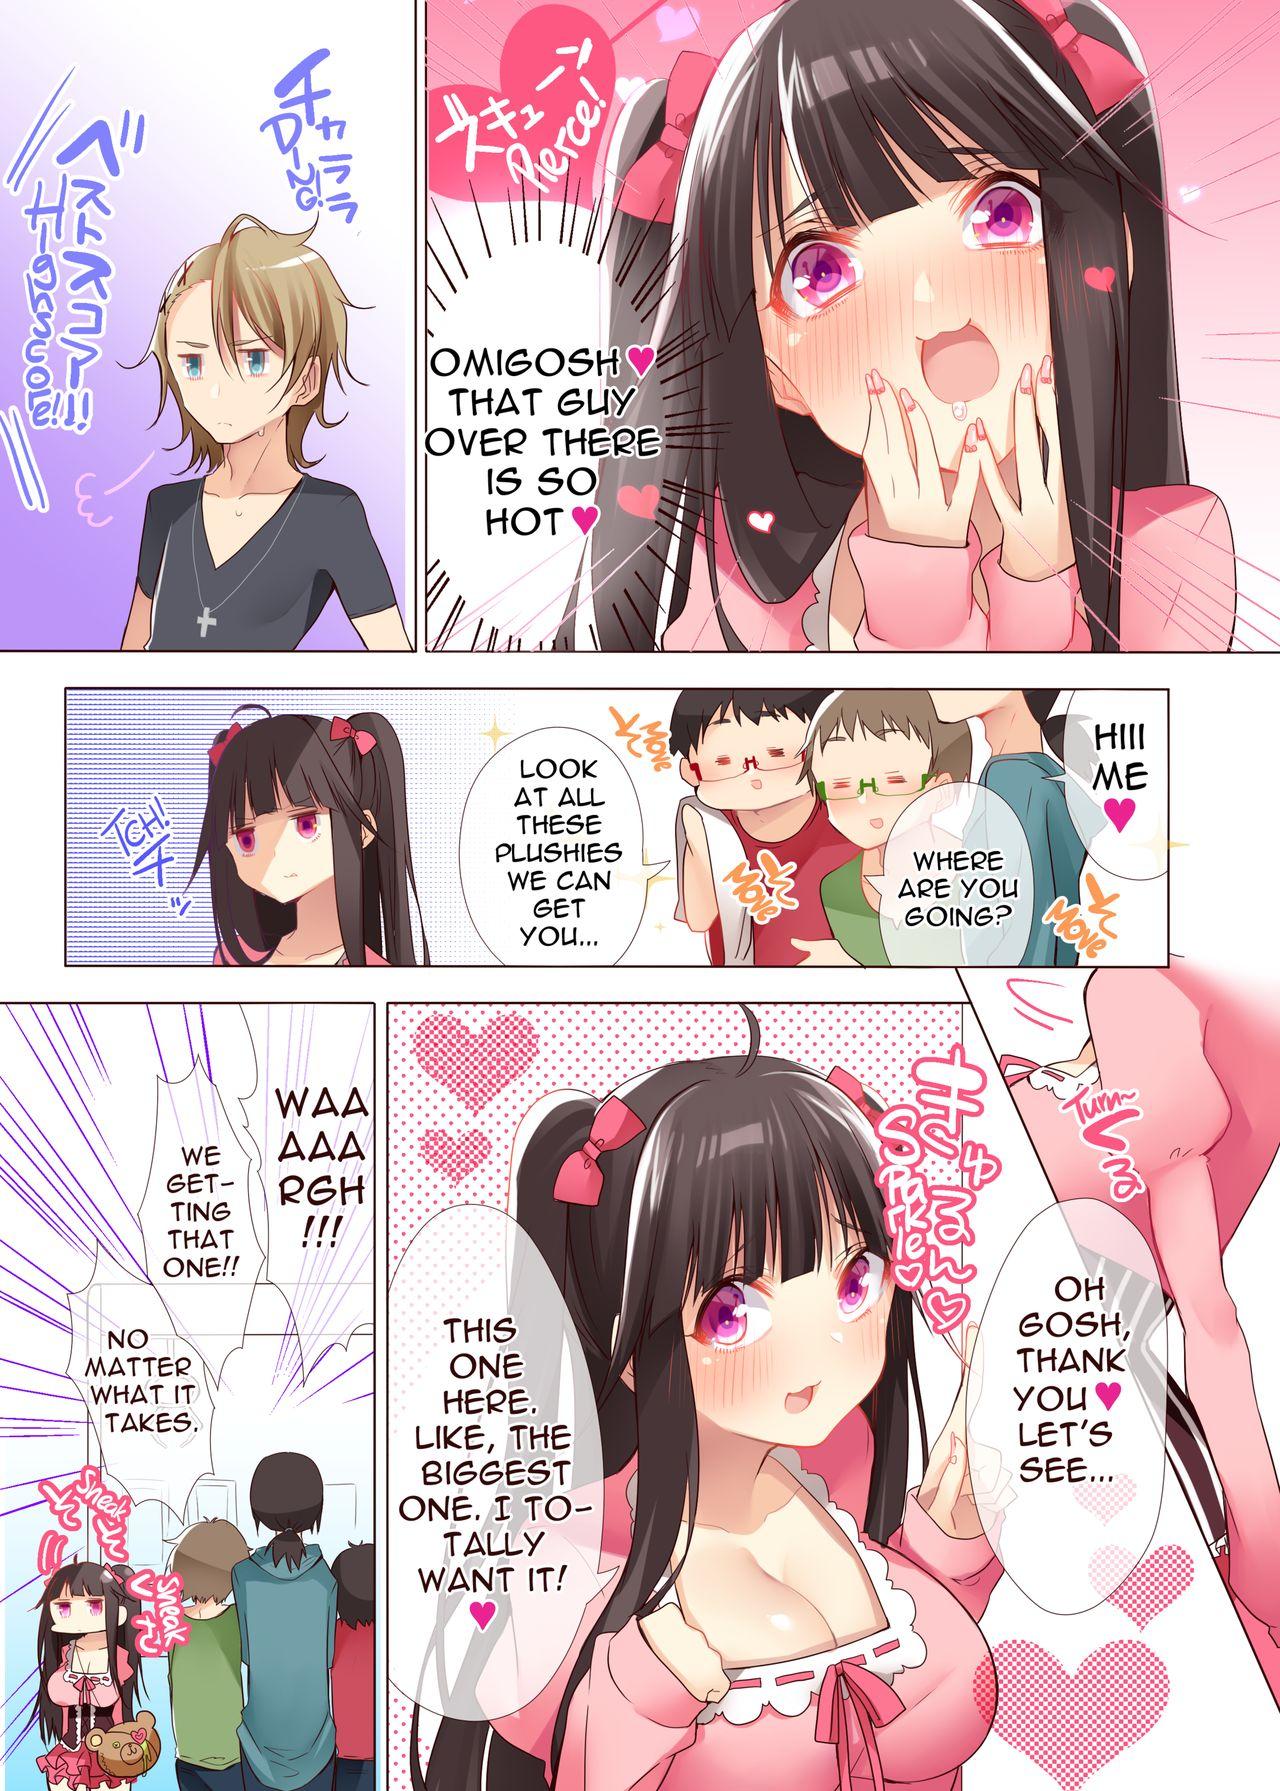 Throat The Princess of an Otaku Group Got Knocked Up by Some Piece of Trash So She Let an Otaku Guy Do Her Too!? - Original Strapon - Page 4